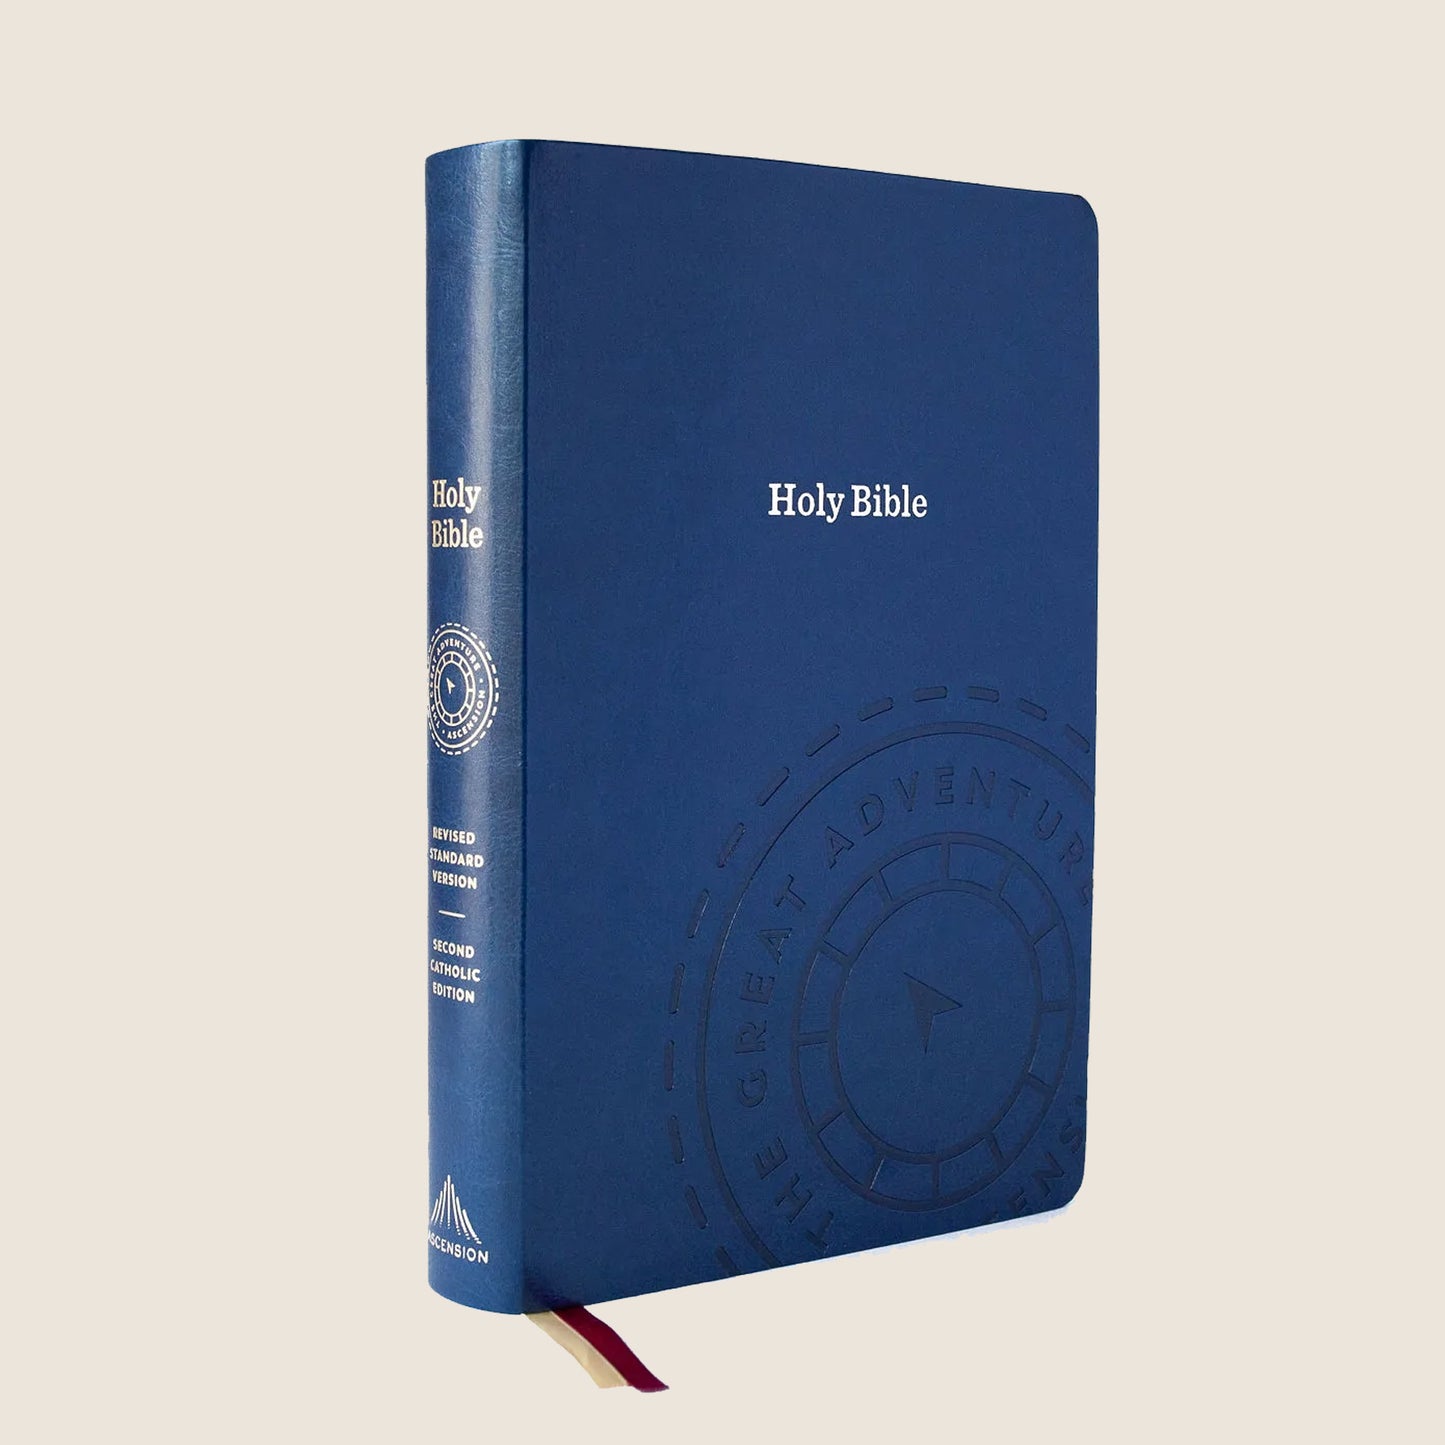 Holy Bible – The Great Adventure Catholic Bible, Leather